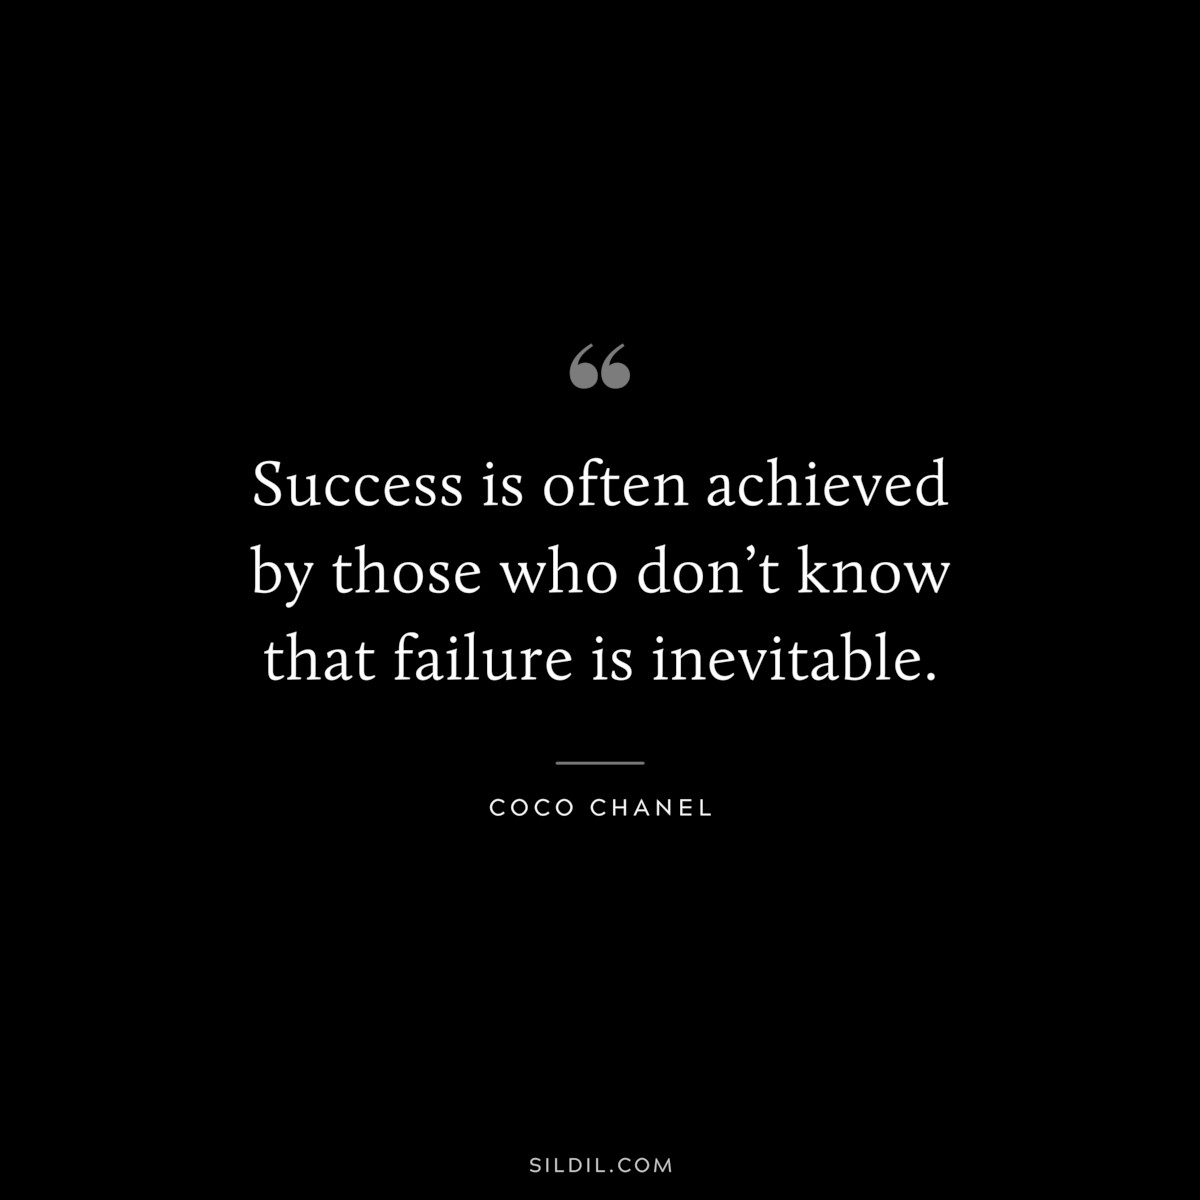 Success is often achieved by those who don’t know that failure is inevitable. ― Coco Chanel